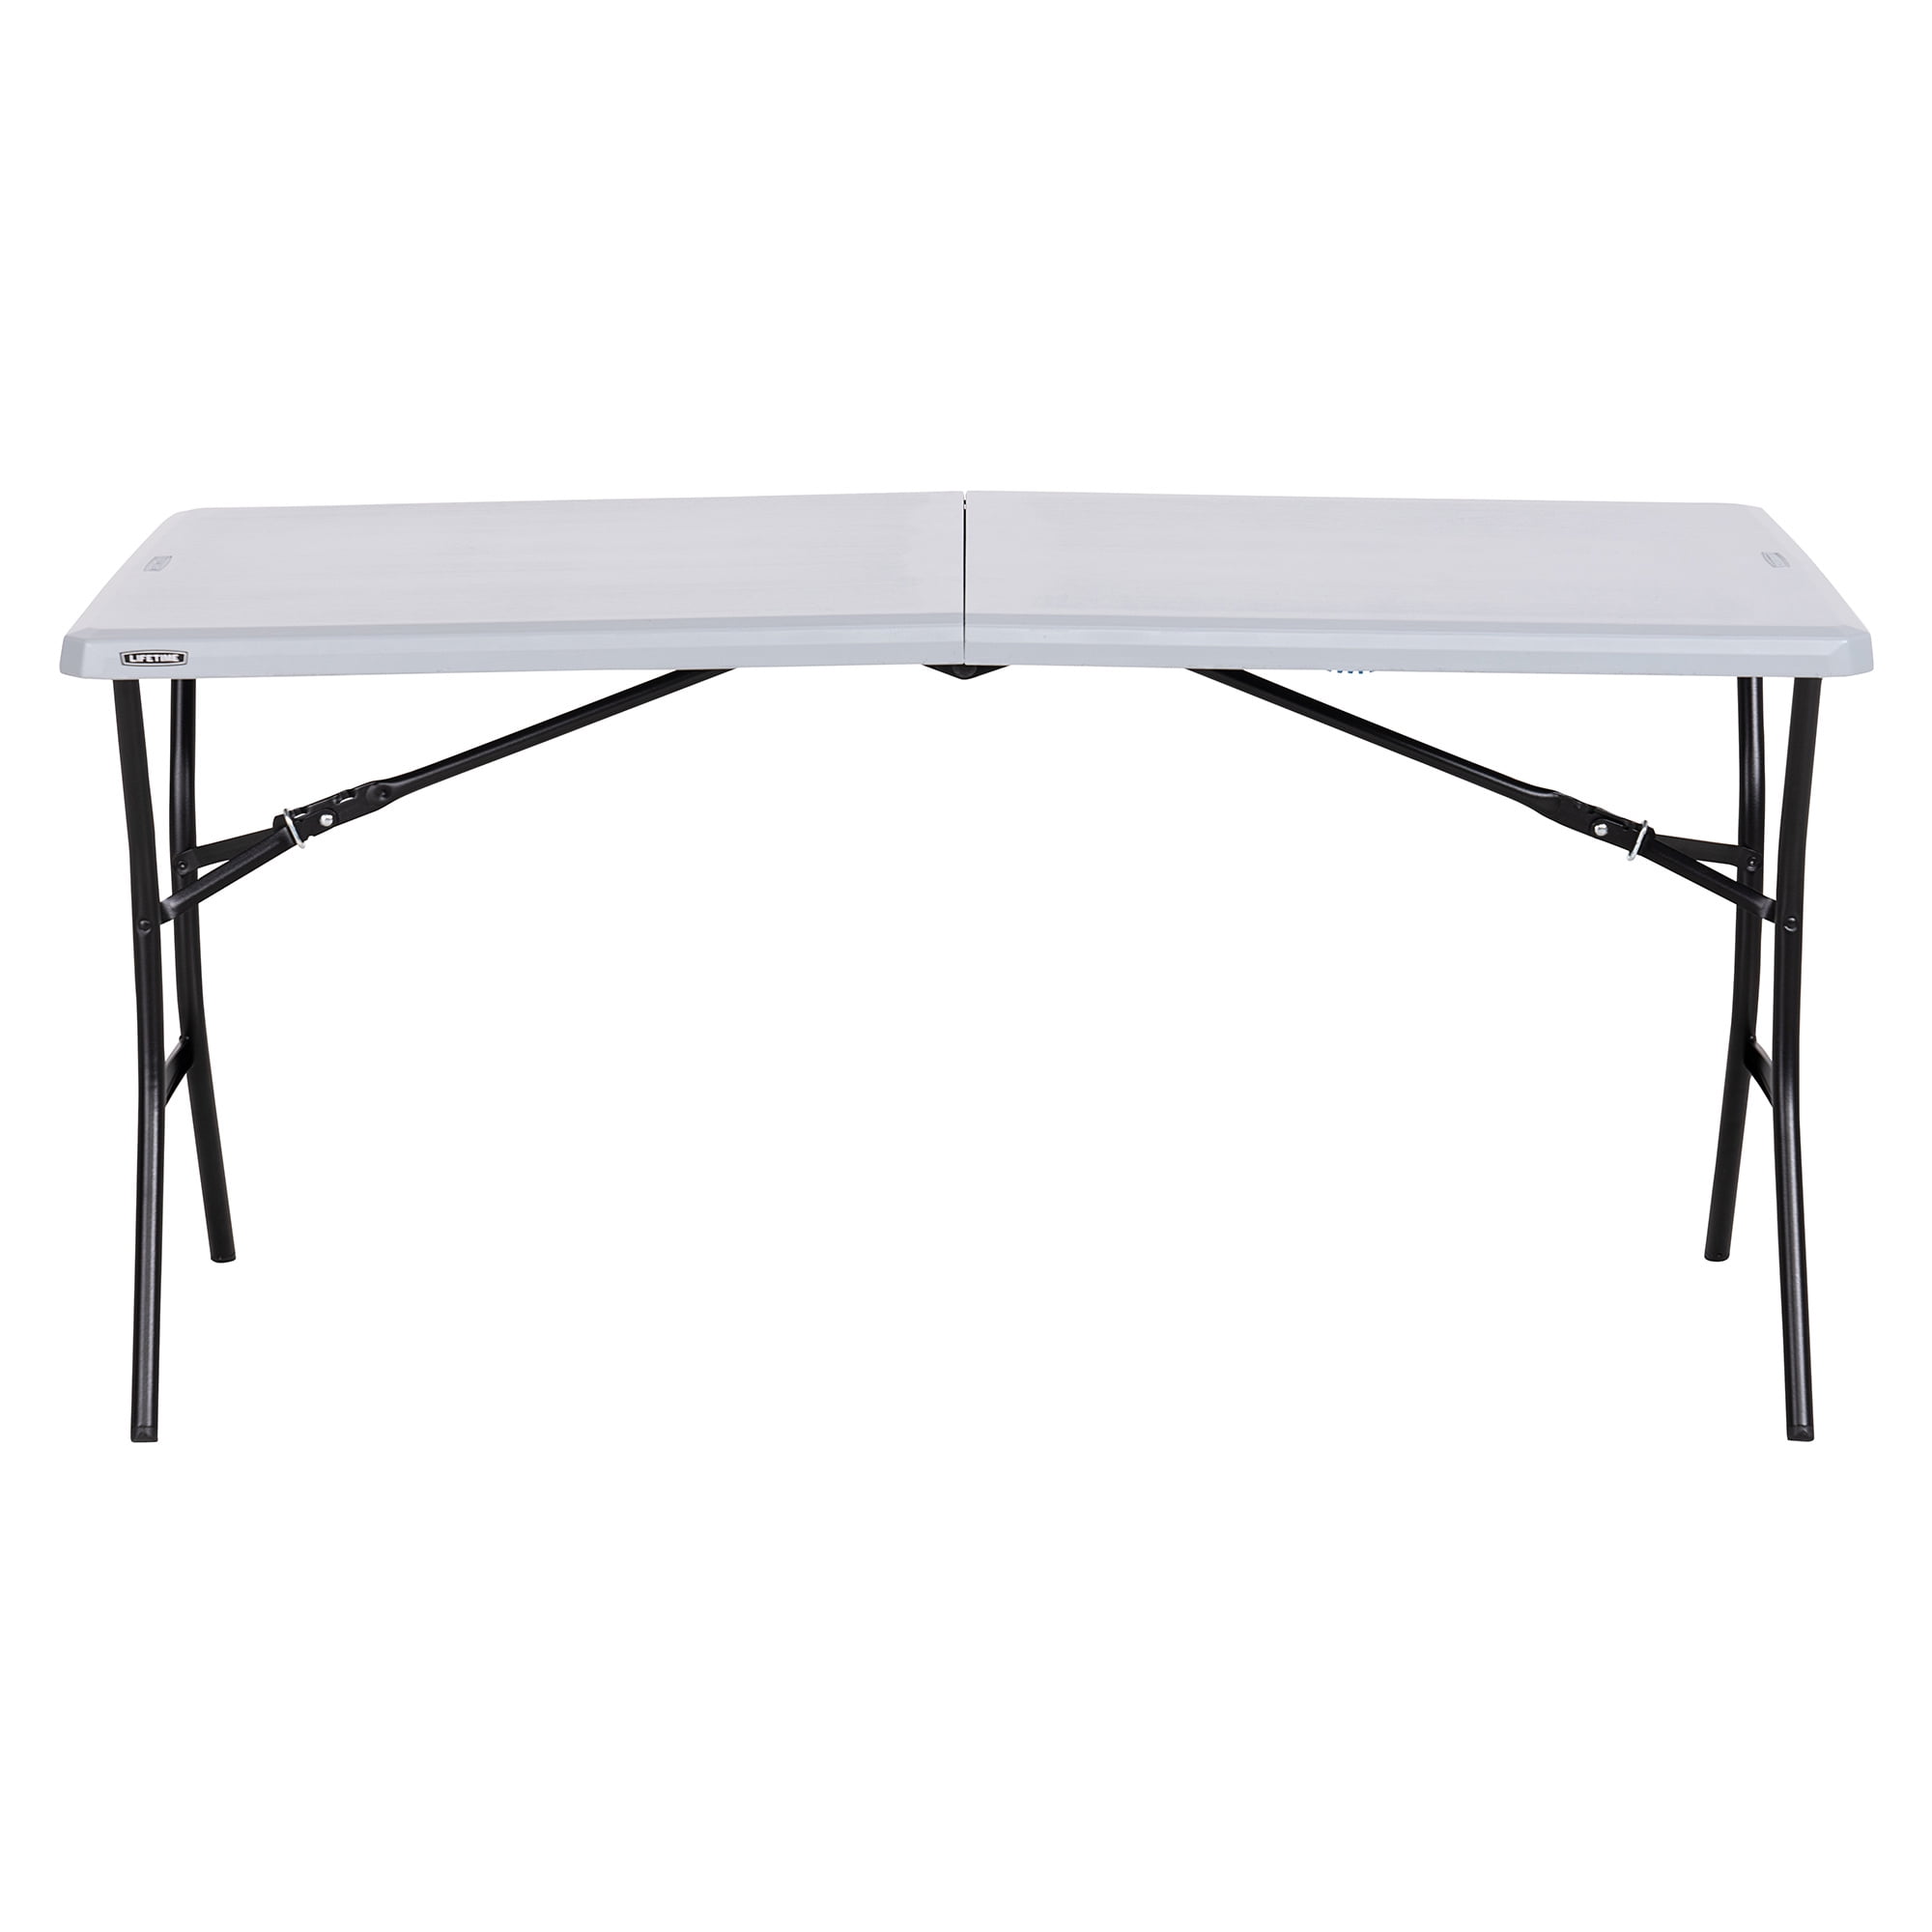 5' Portable Folding Table Outdoor Picnic Camping Dining Lifetime Fold in Half 